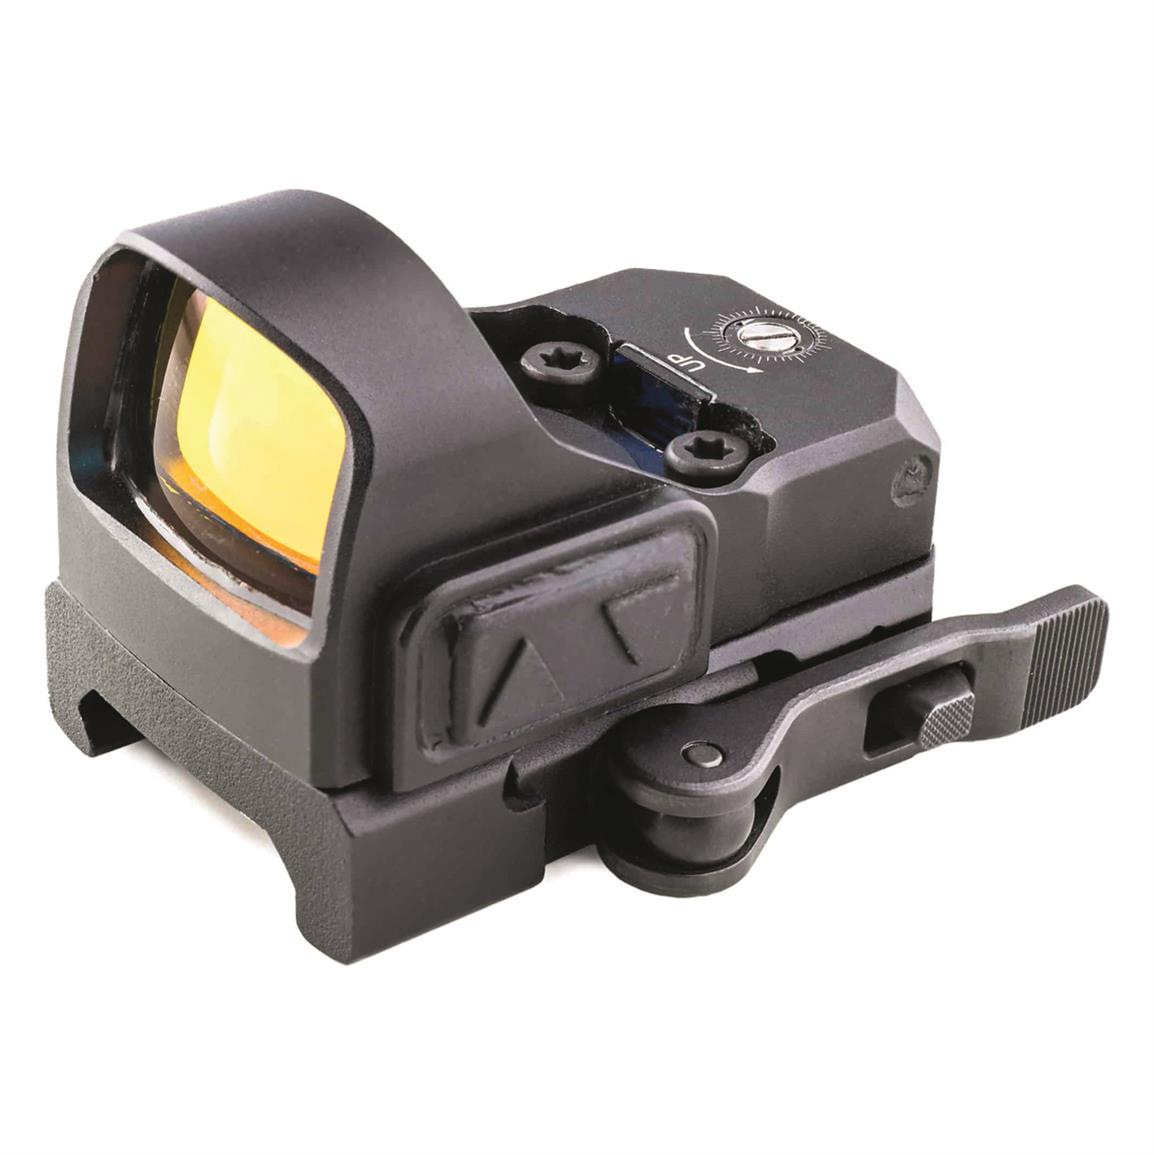 Meprolight microRDS Red Dot Sight with Picatinny Adapter